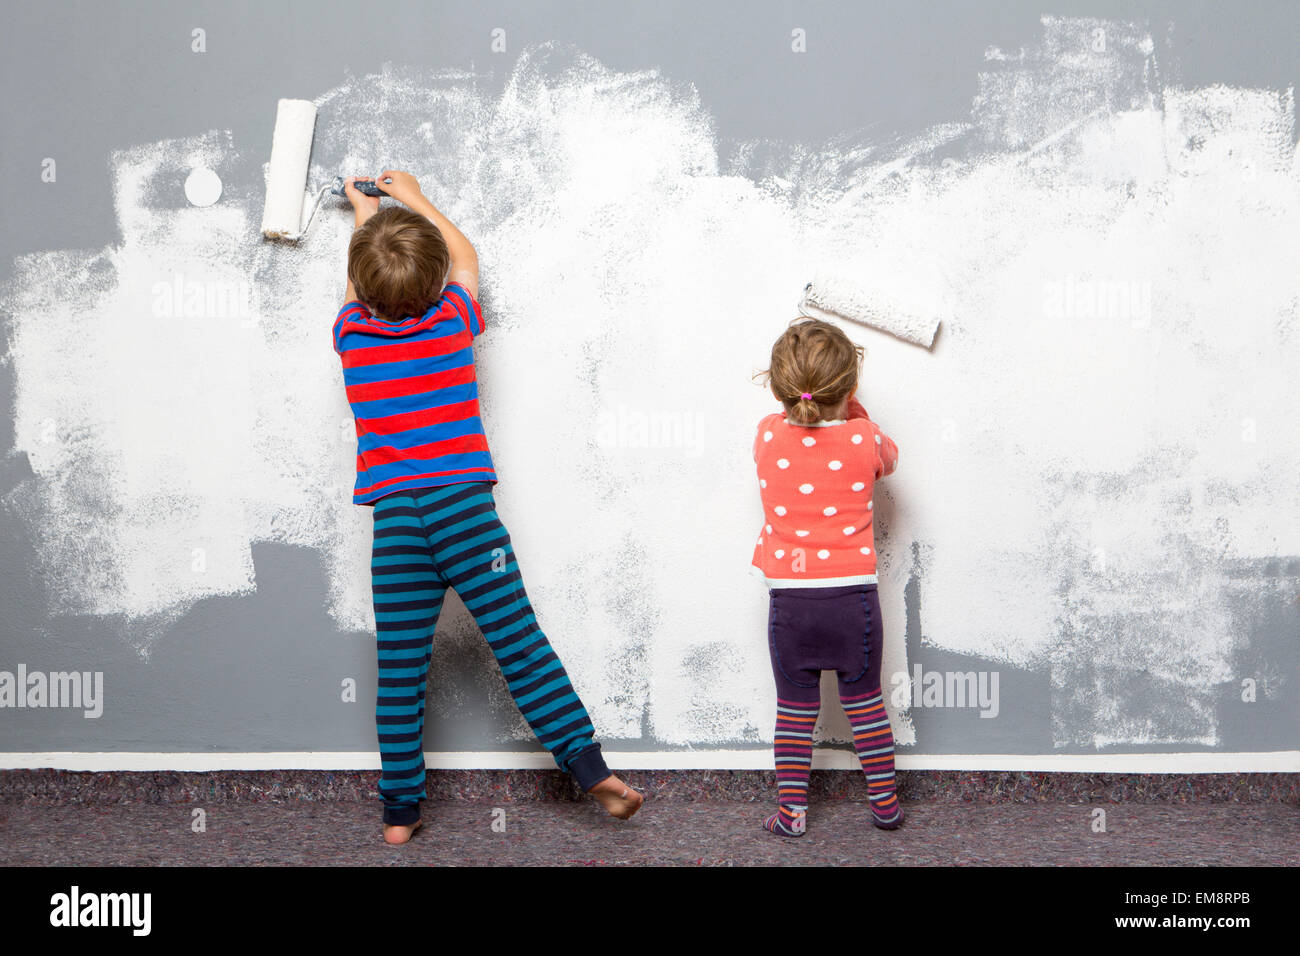 Rear view of female toddler and brother painting wall Stock Photo